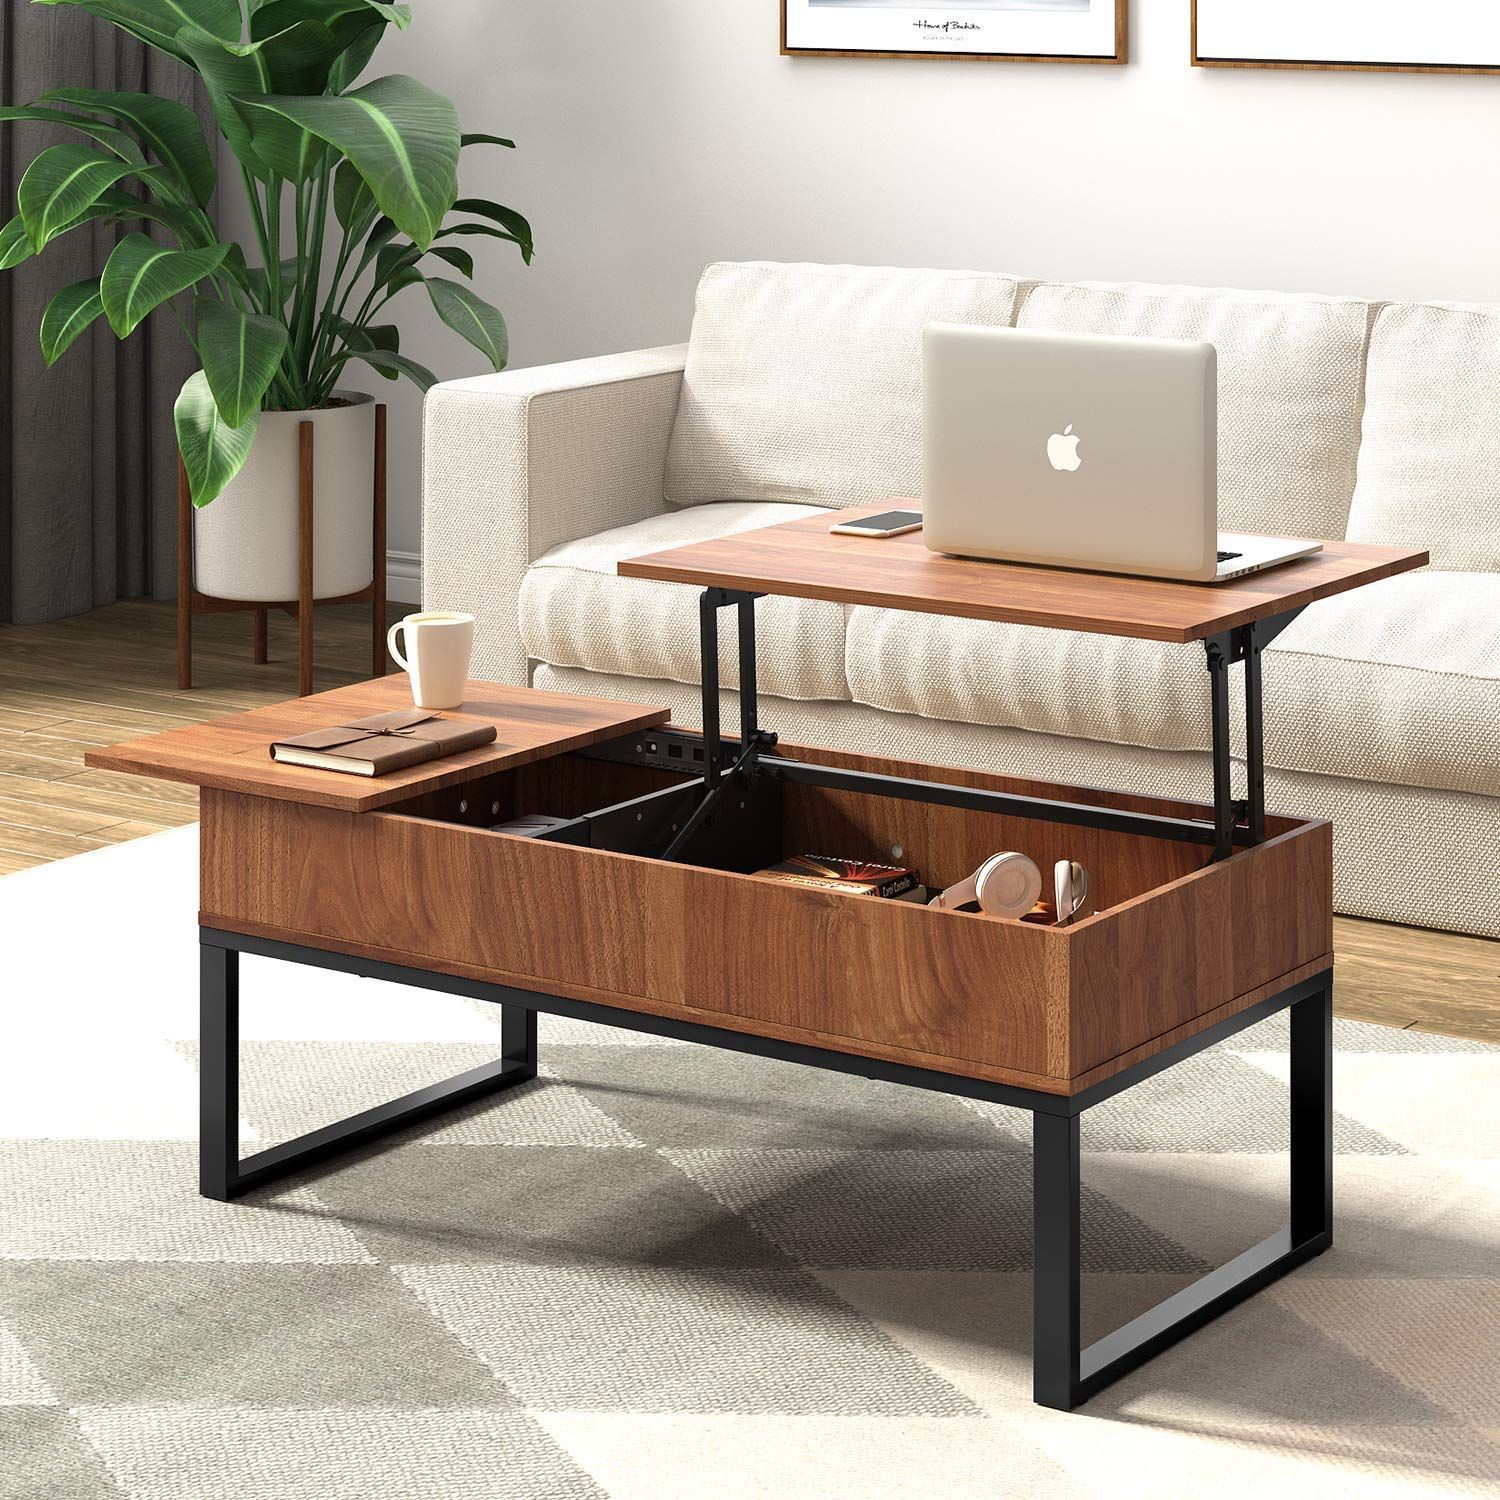 Wlive Wood Coffee Table With Adjustable Lift Top Table, Metal Frame Intended For Lift Top Coffee Tables With Storage Drawers (View 20 of 20)